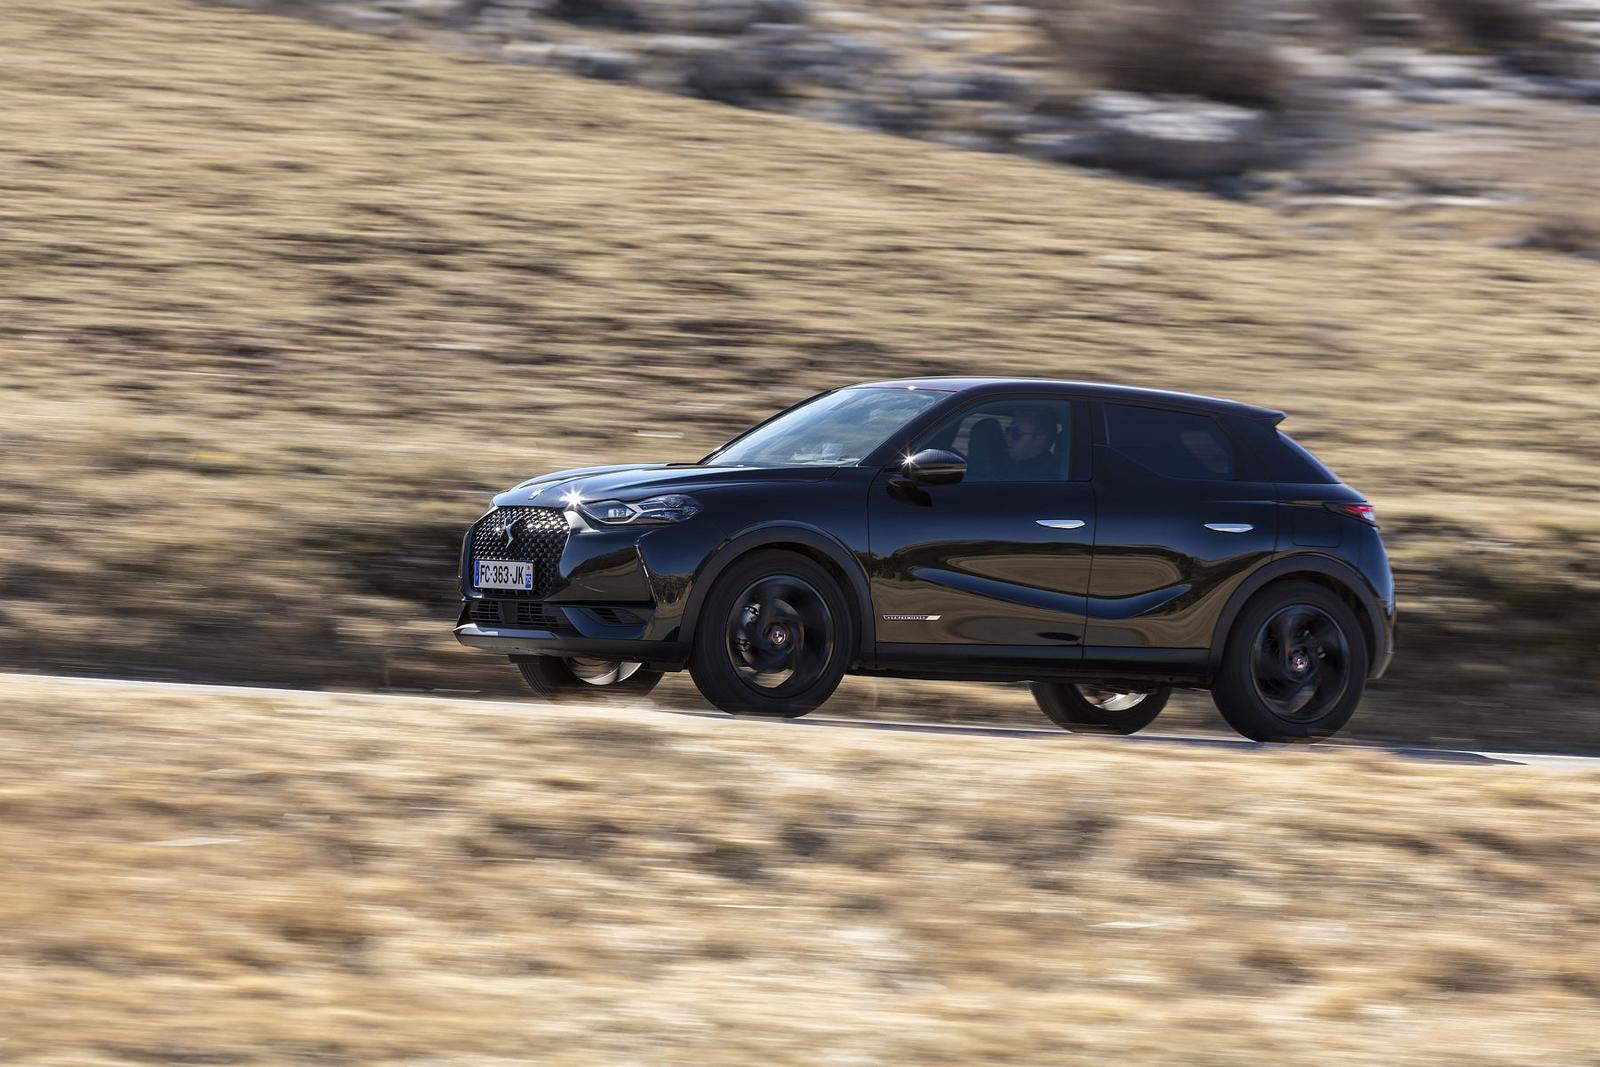 DS 3 Crossback 2019 (37)